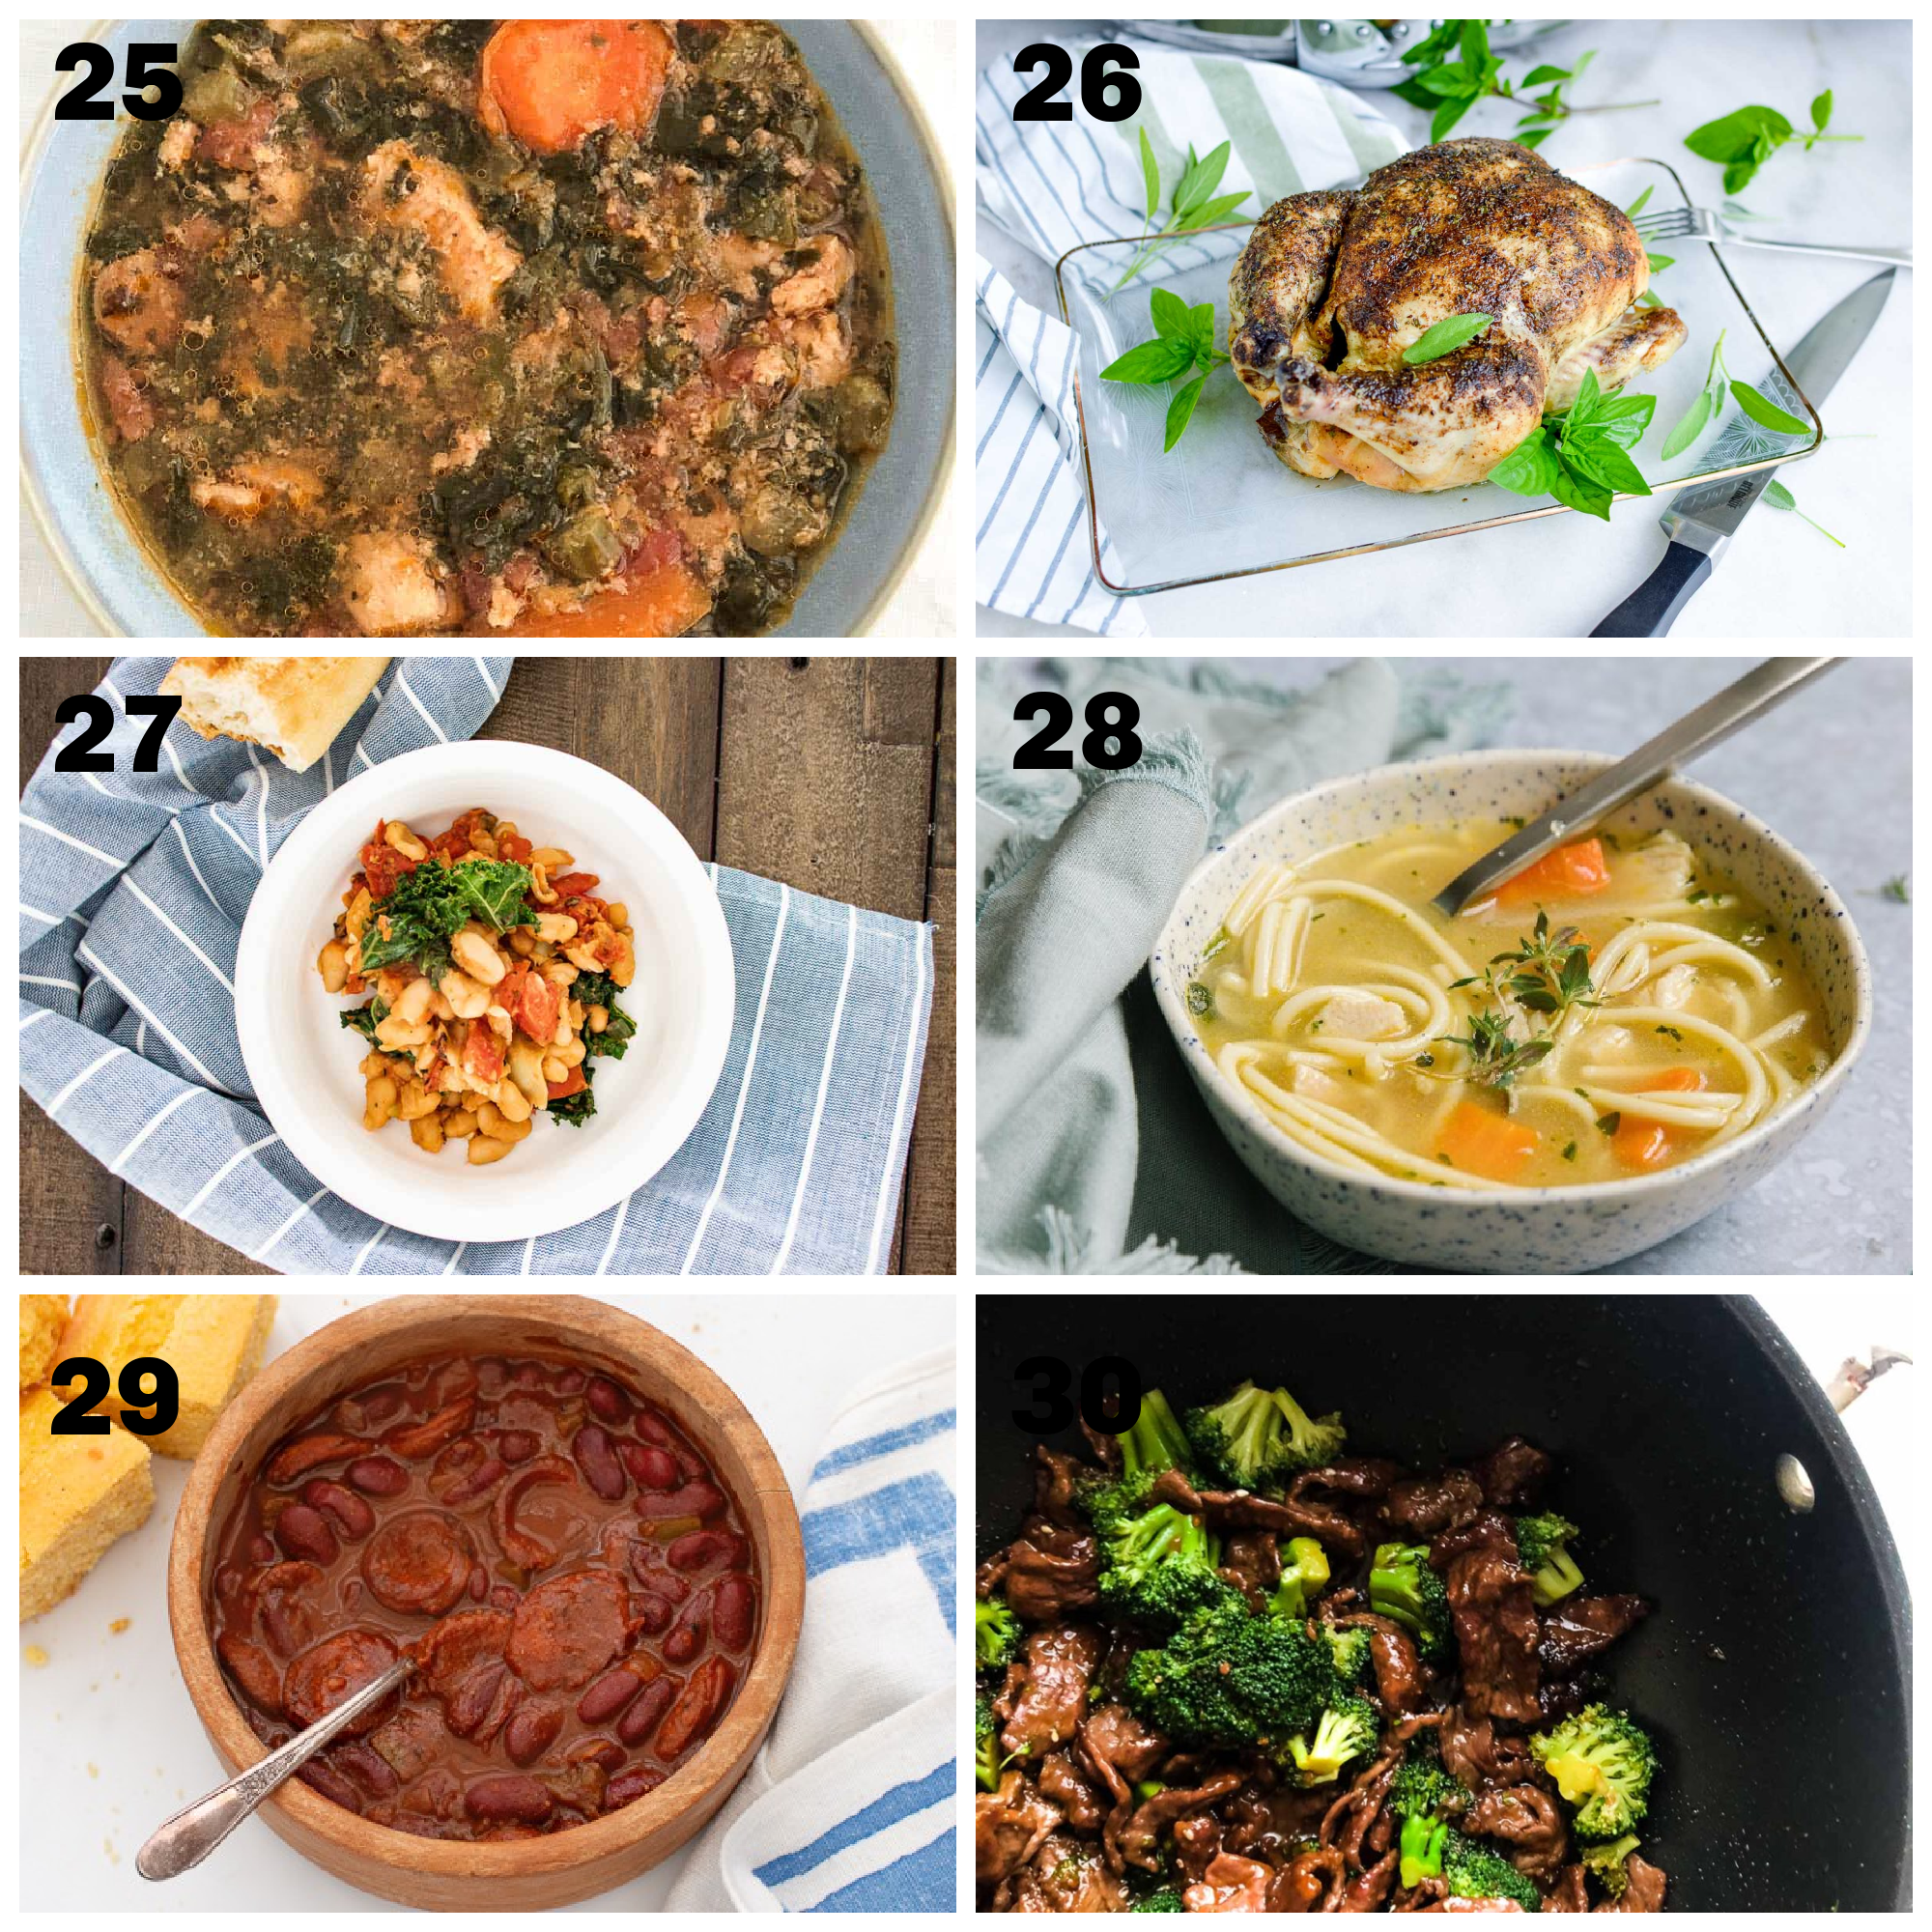 6 completed dinner ideas for make ahead meals under 350 calories labeled 25-30